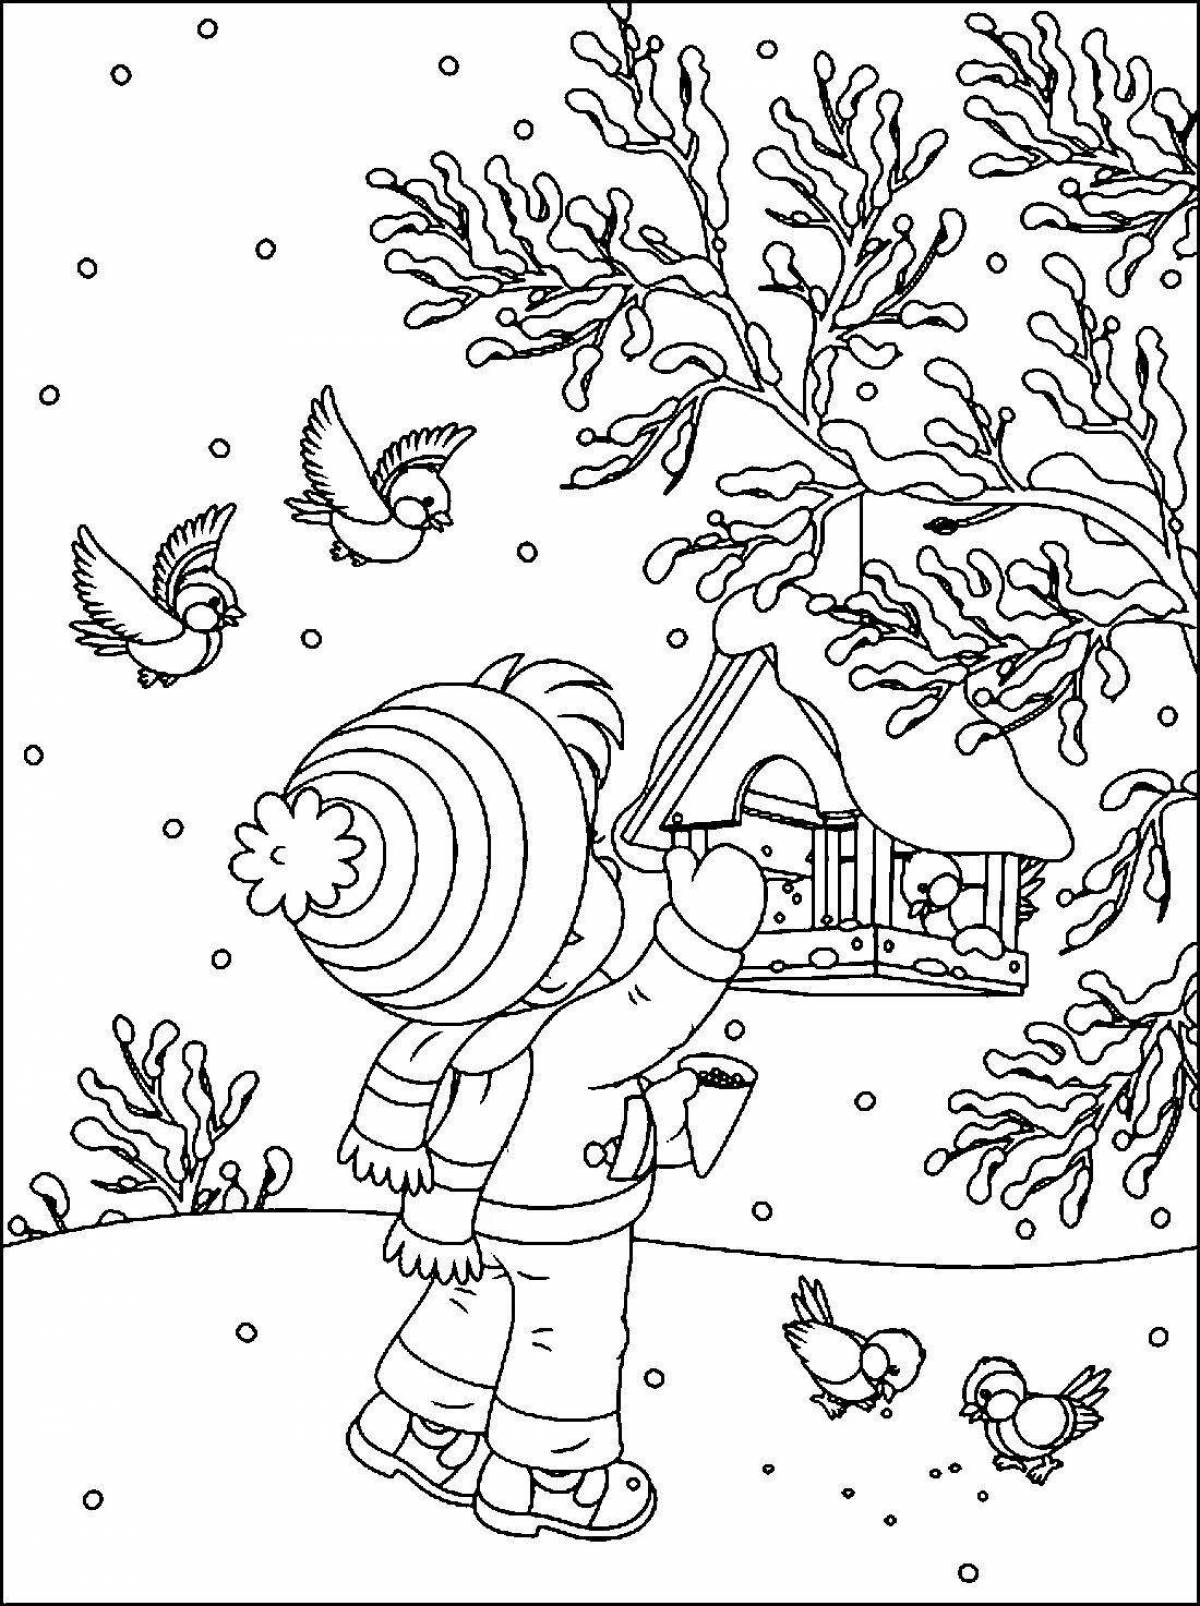 Adorable bird feeder coloring pages for kids